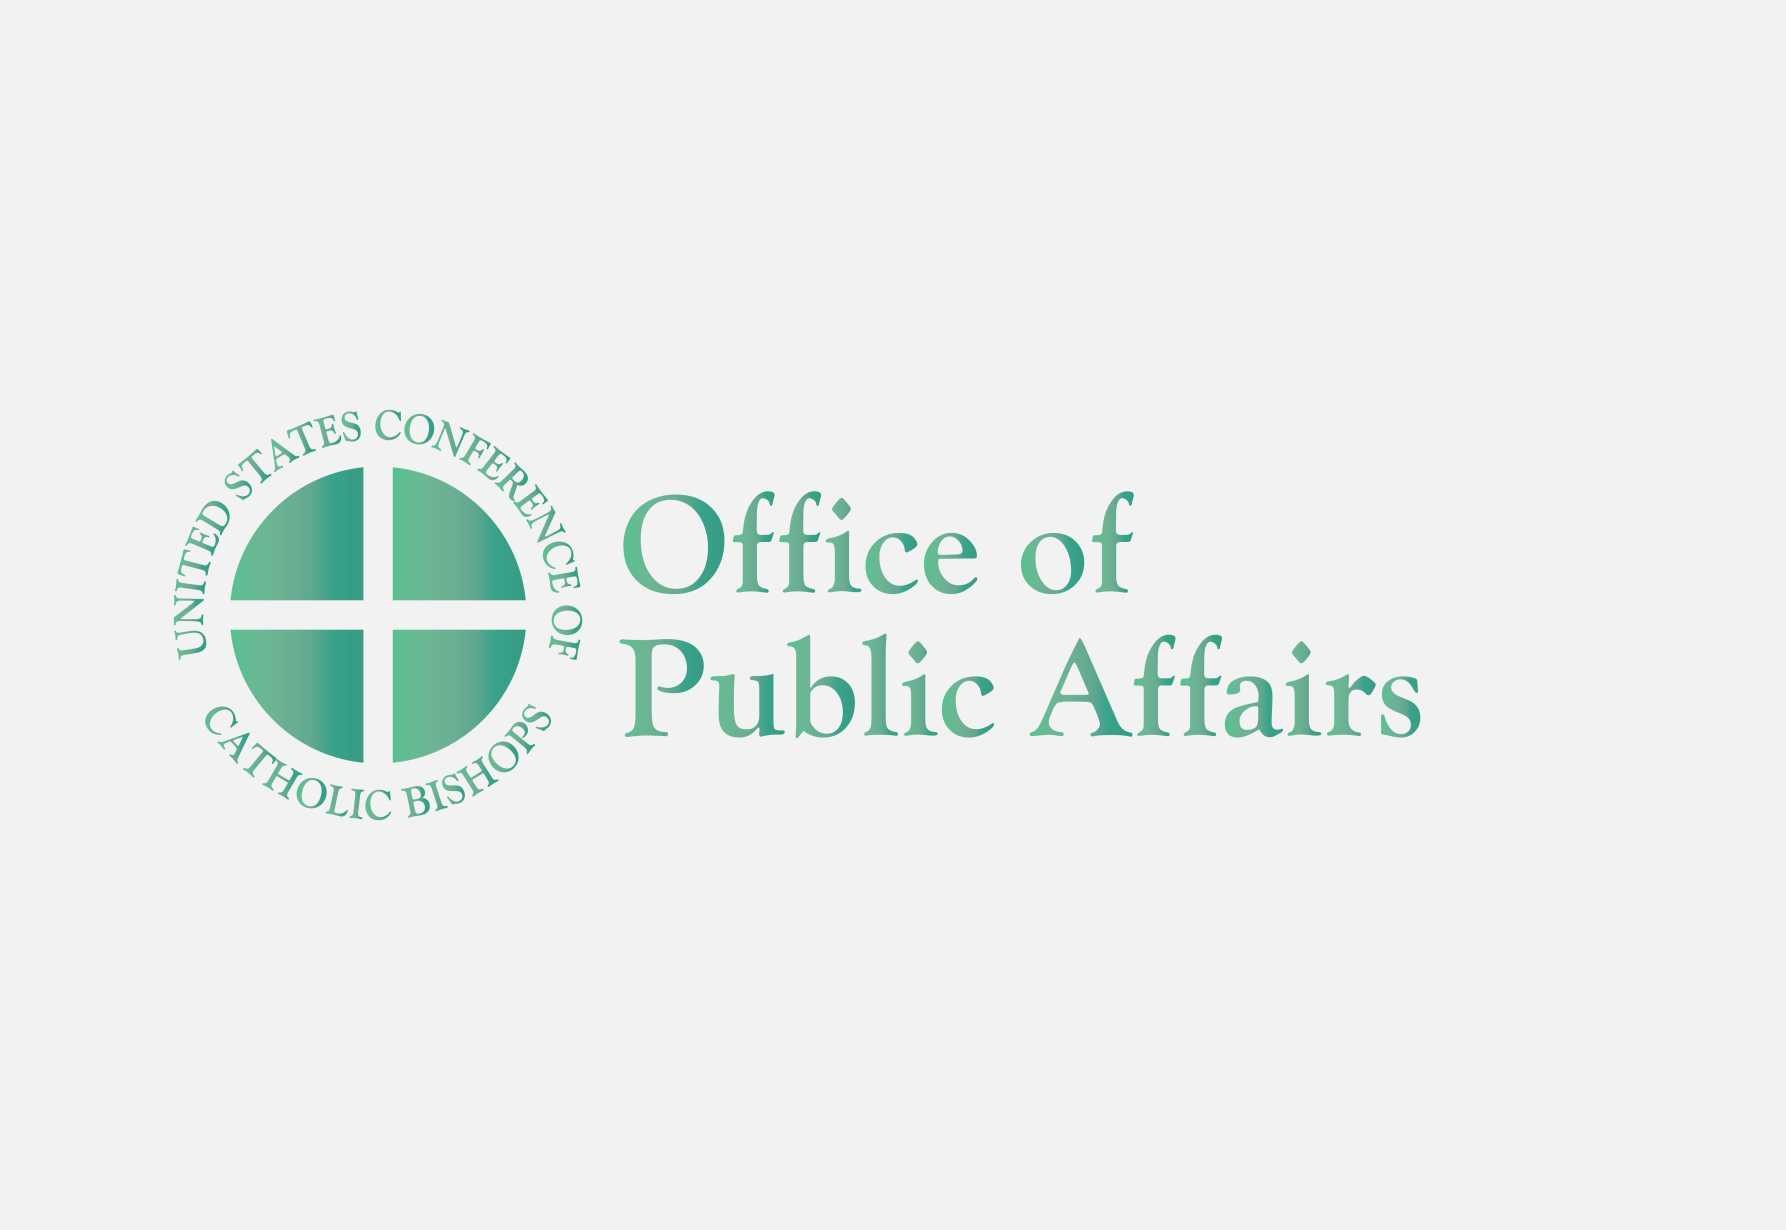 Statement of USCCB on Vatican’s Document Addressing Pastoral Blessings